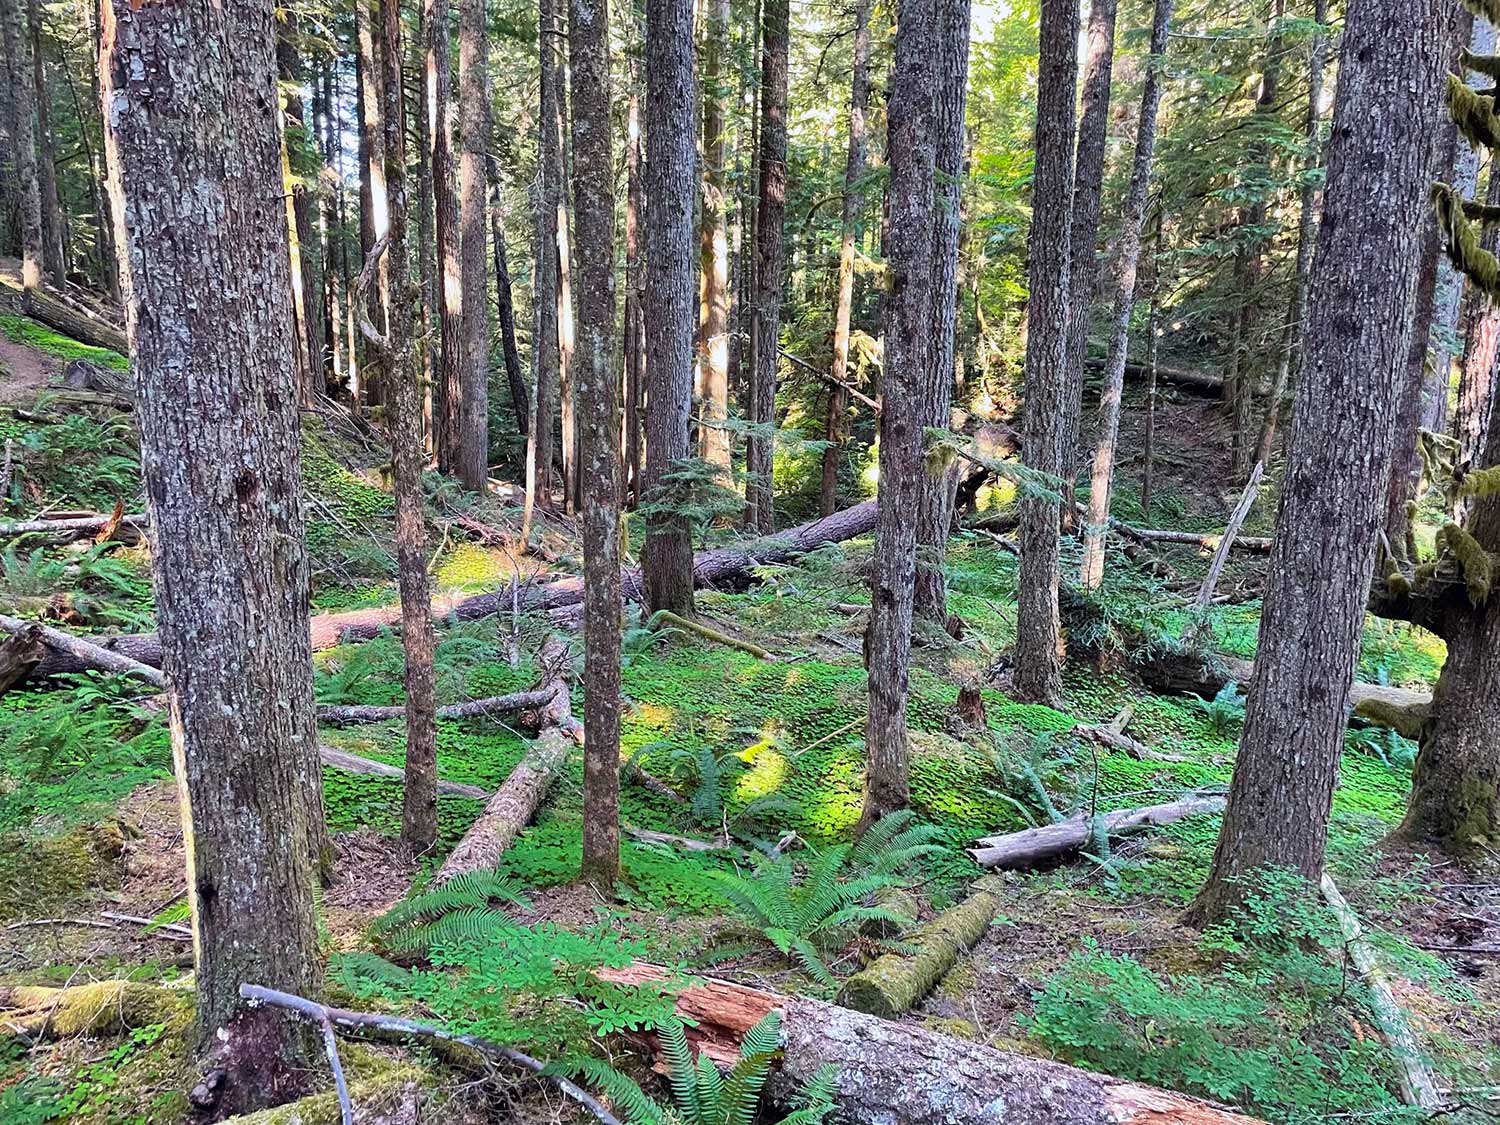 Multiple trees along the trail with ferns and other bright green ground cover and downed wood along a trail